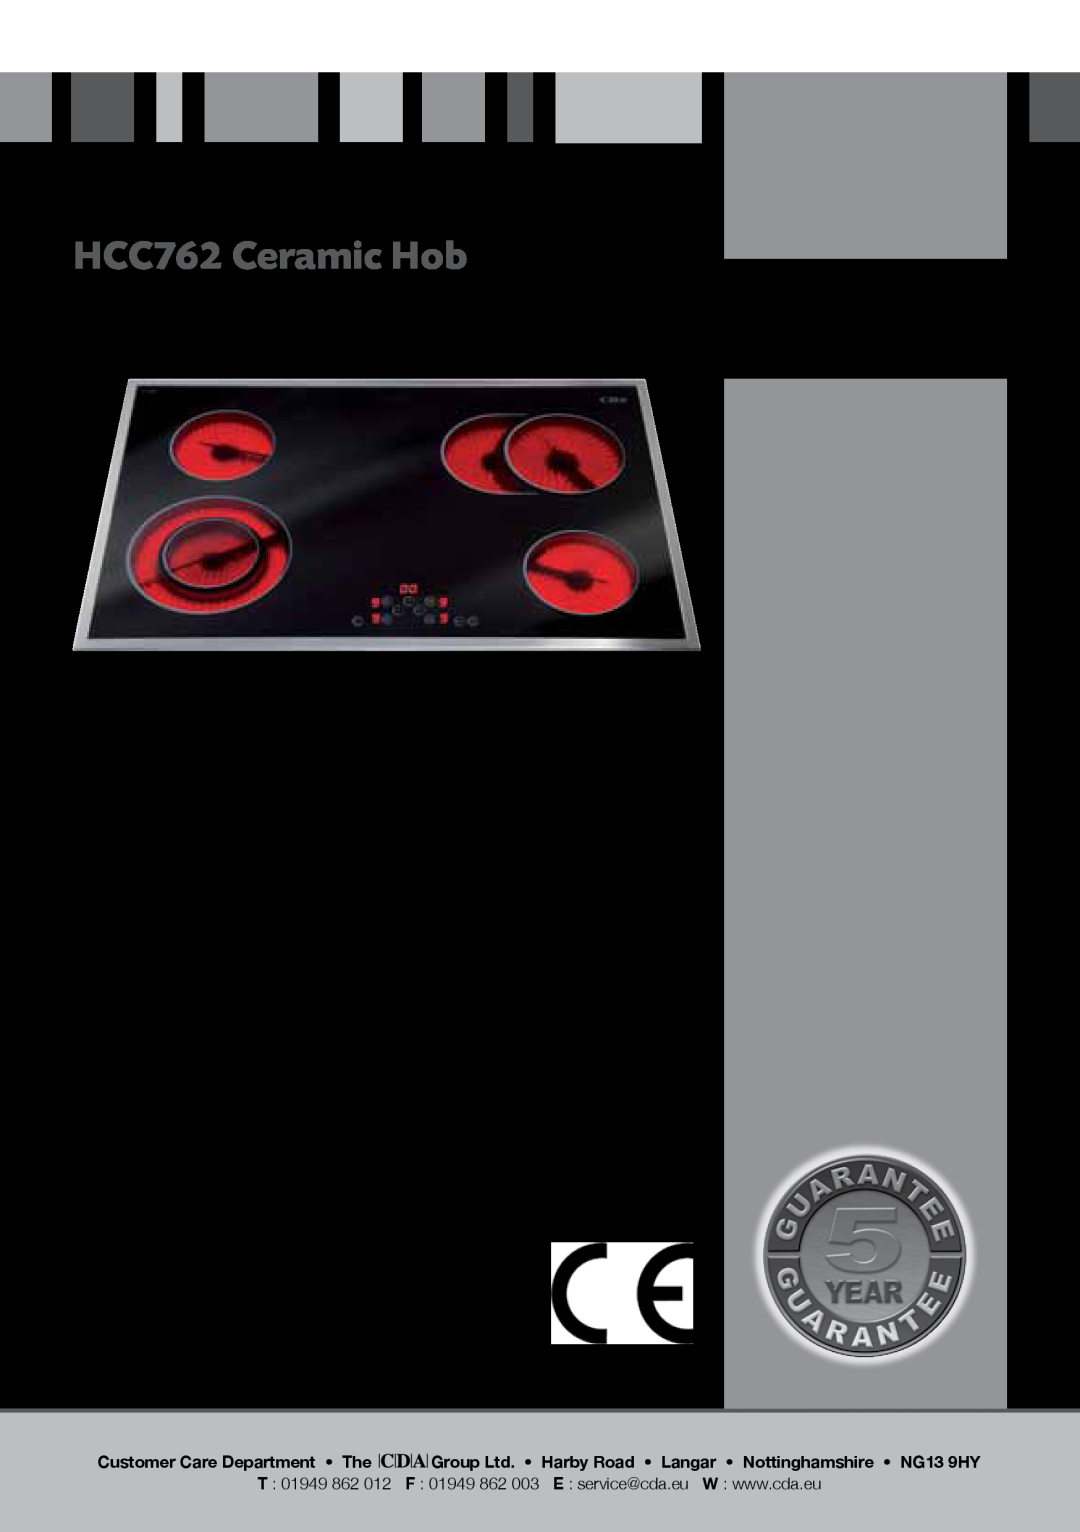 CDA manual HCC762 Ceramic Hob, Manual for Installation, Use and Maintenance, Customer Care Department The 